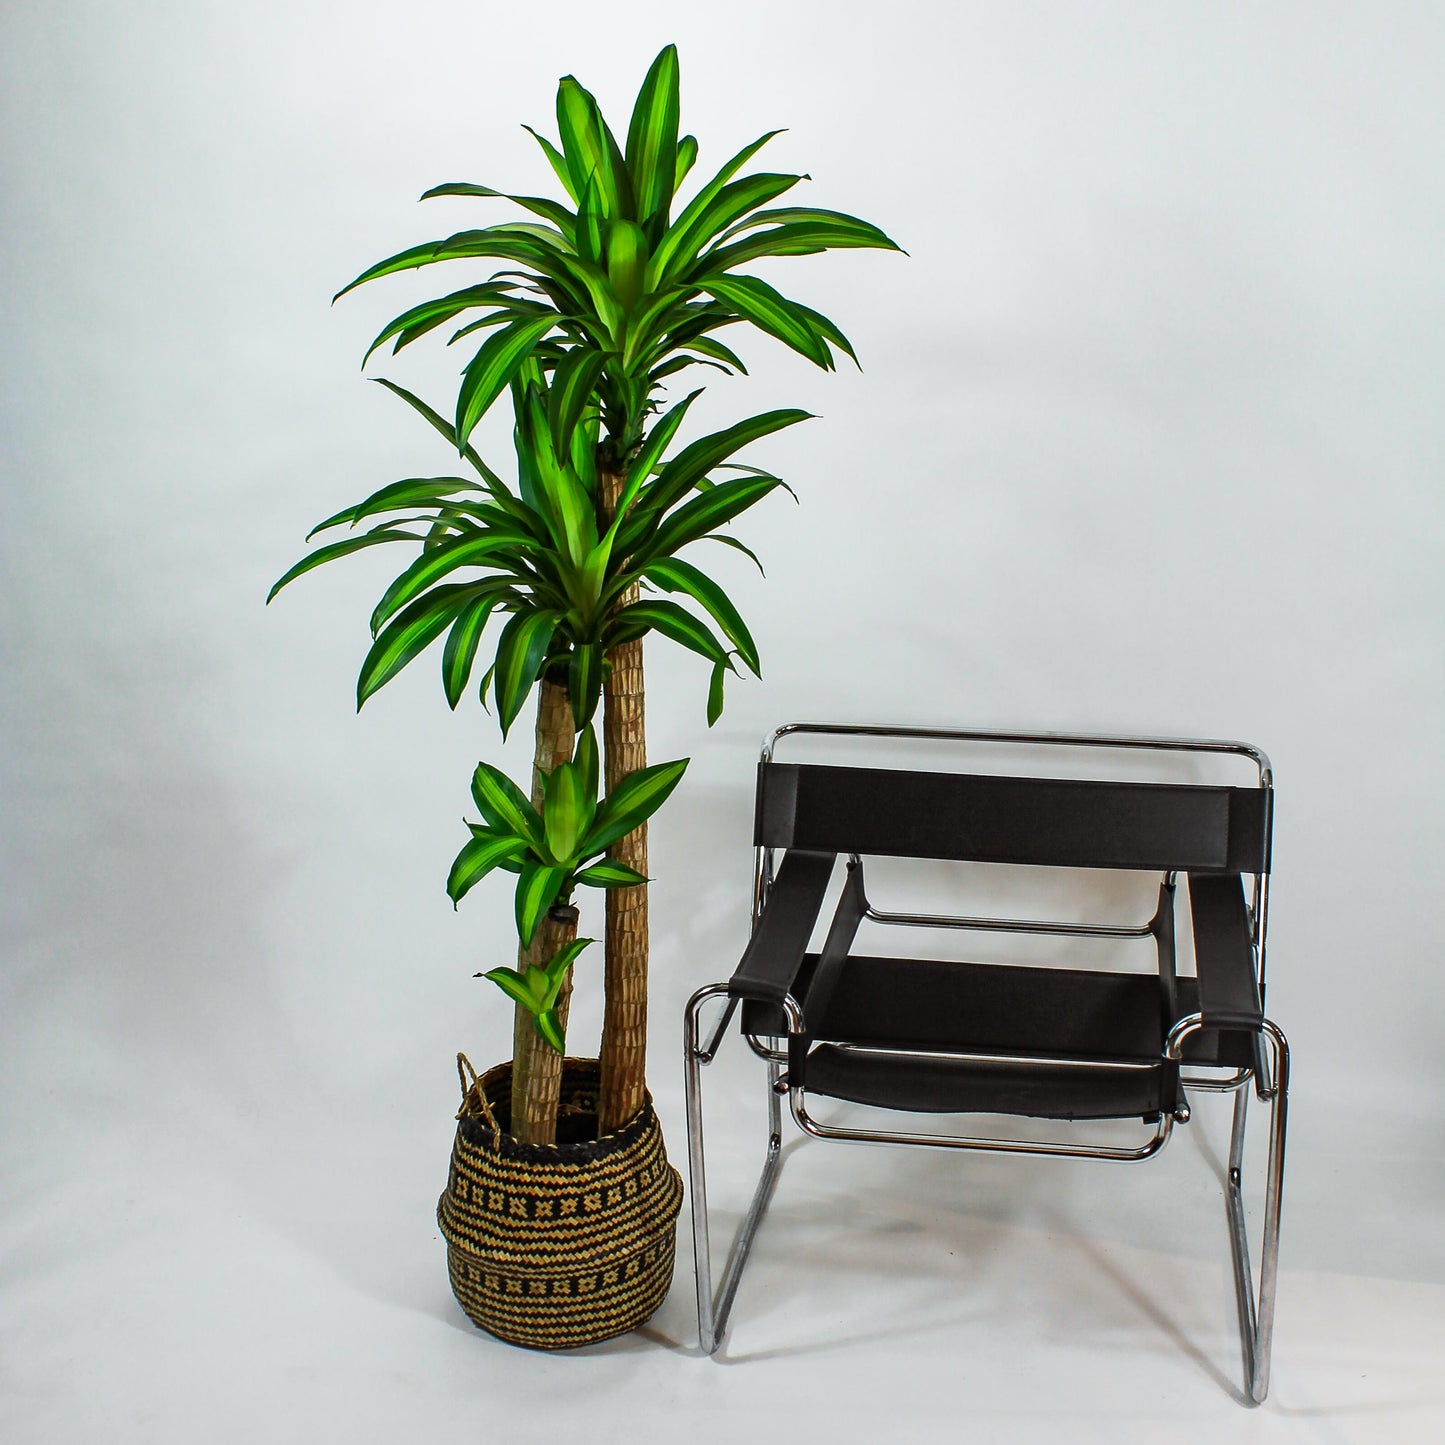 Staggered Corn Plant (Dracaena massangeana) in a 12 inch pot. Indoor plant for sale by Promise Supply for delivery and pickup in Toronto